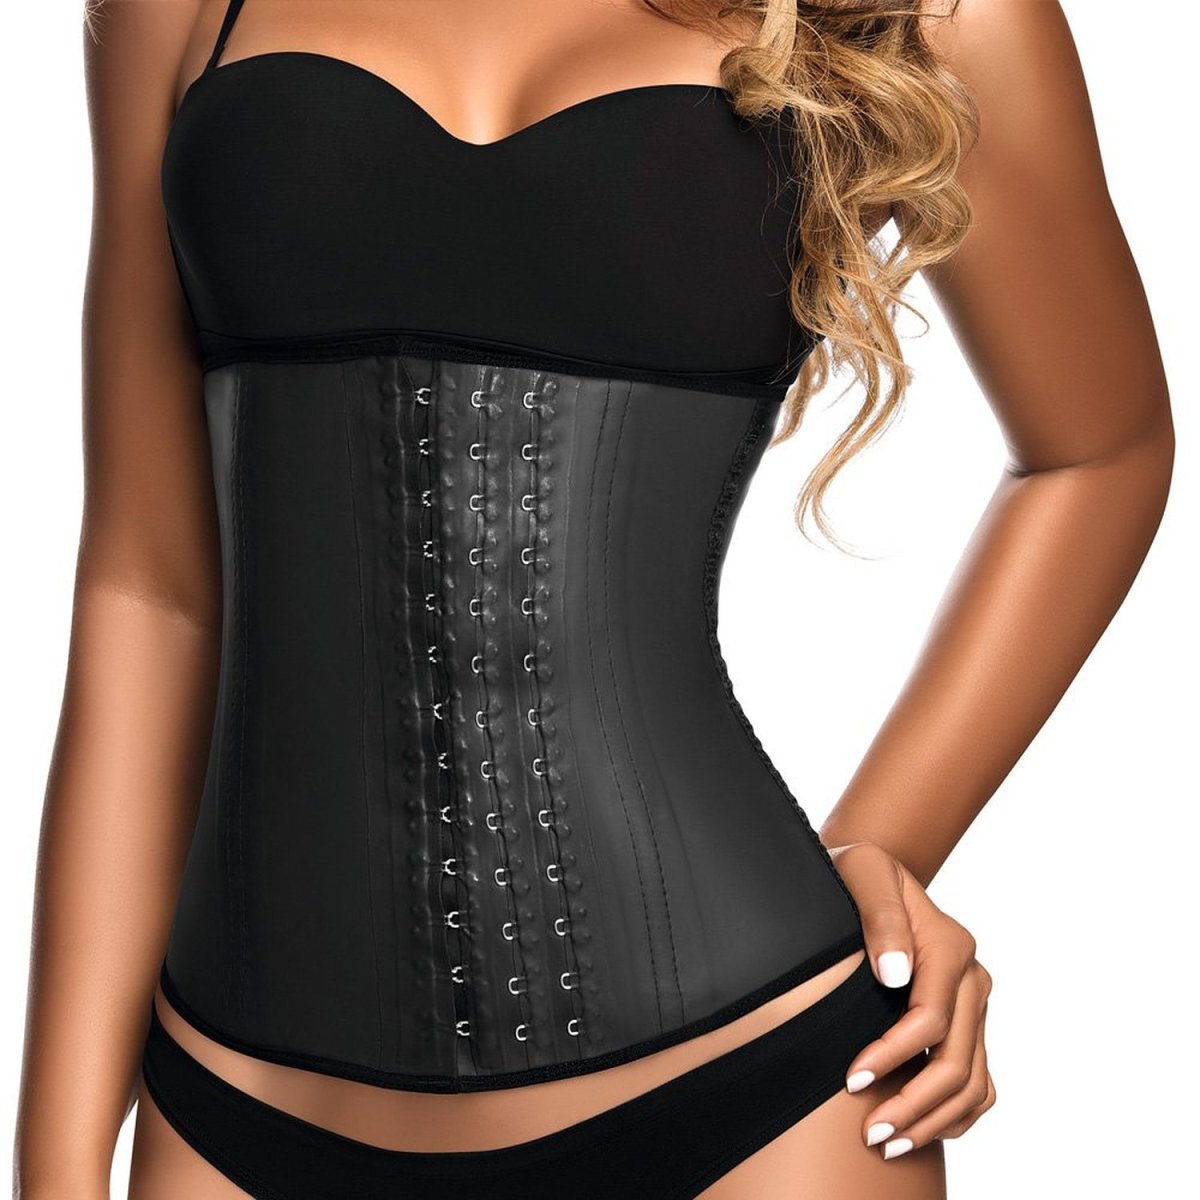 Main Points Related to Waist Shaper